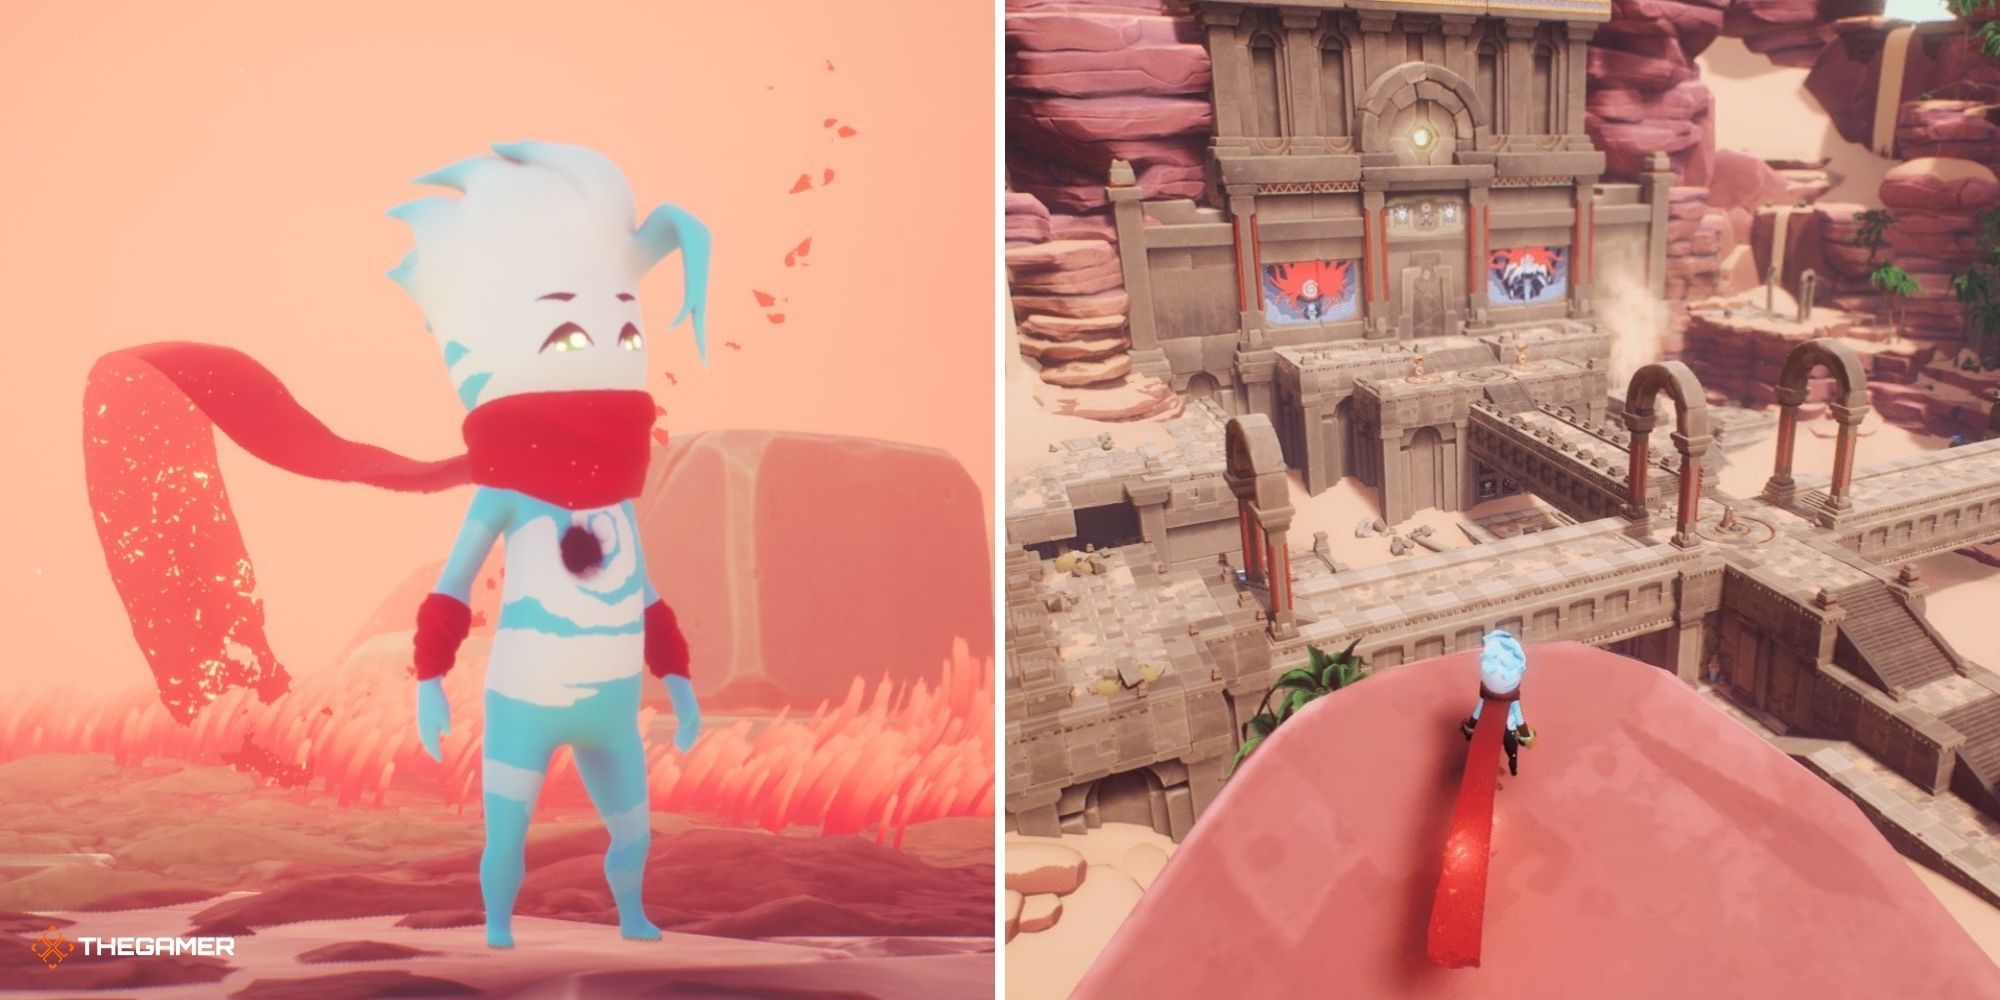 Scarf - Nomad at beginning of the game on left, Nomad overlooking puzzle on right